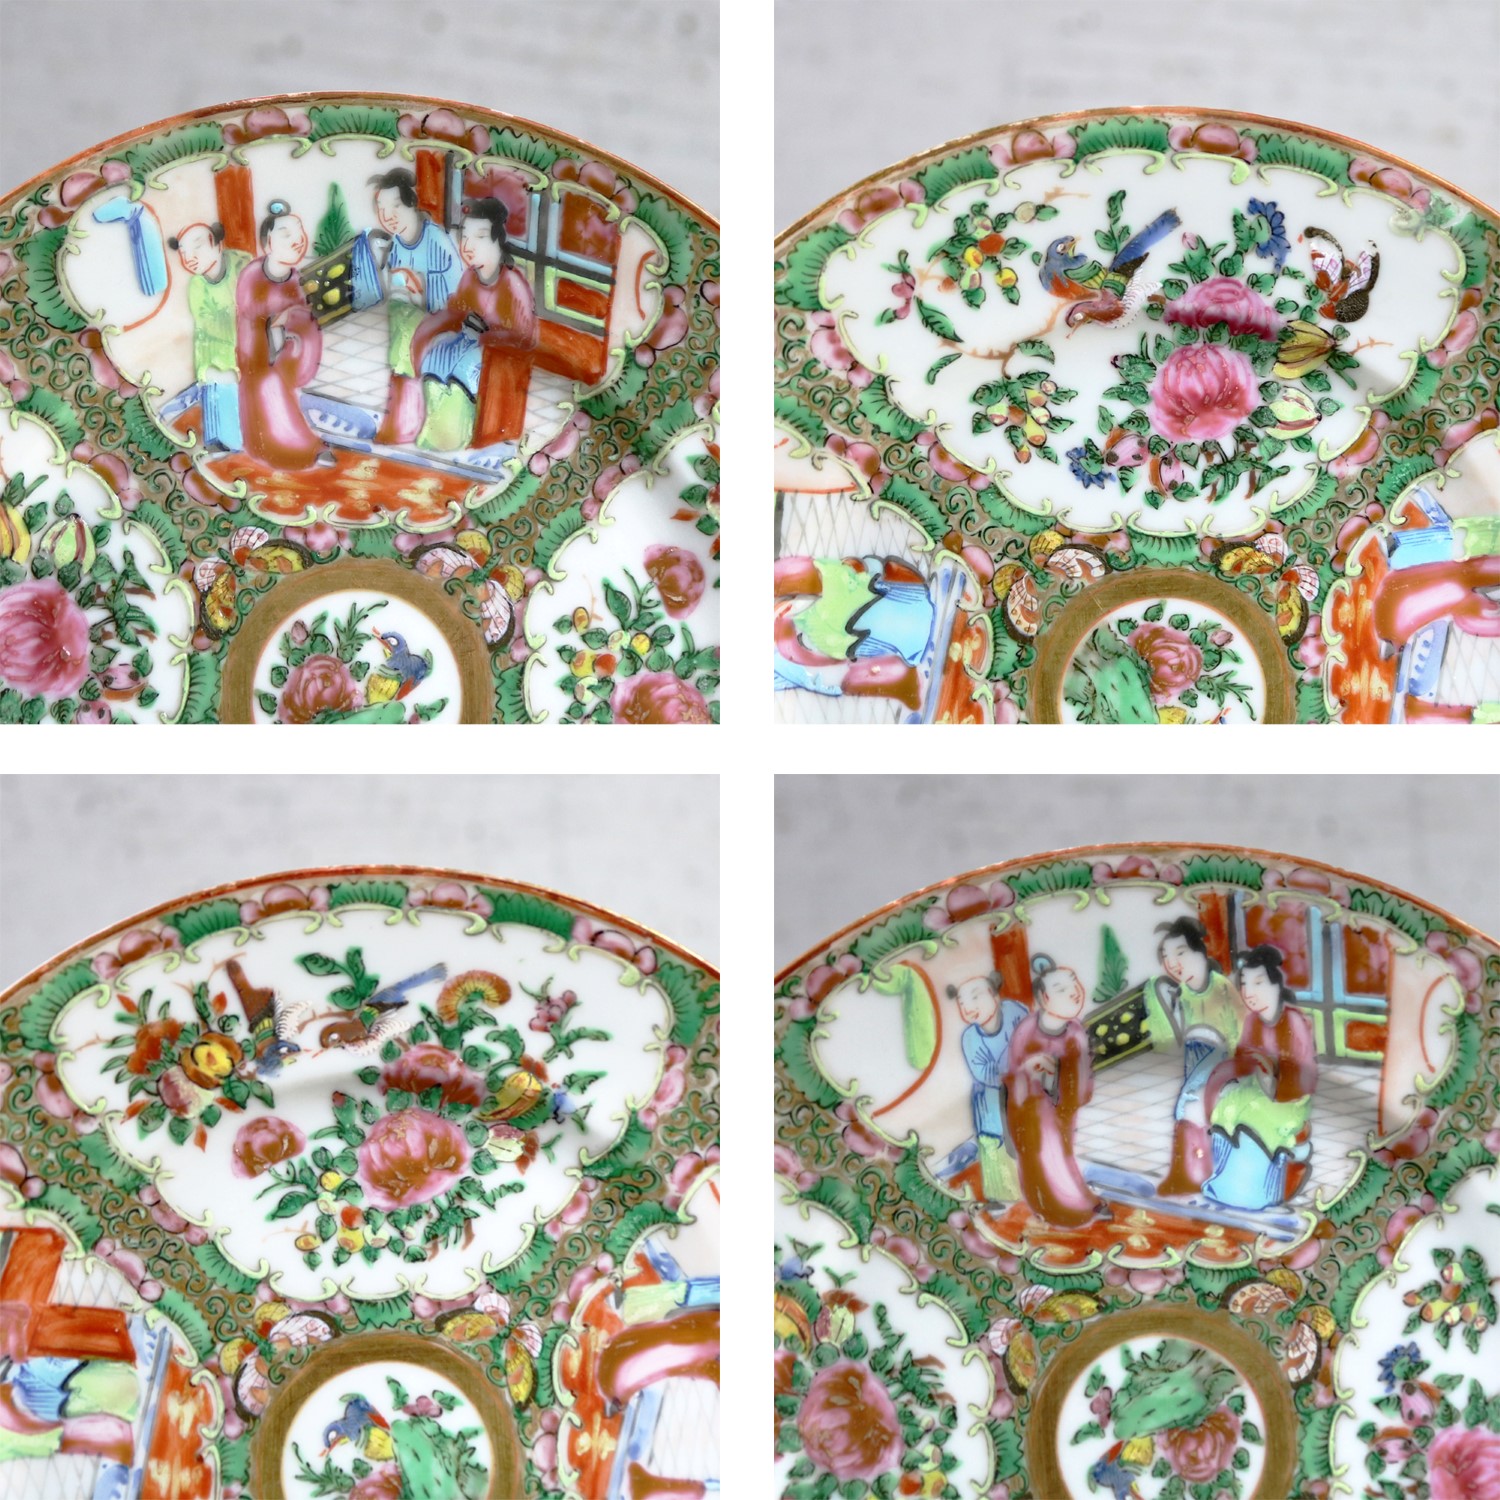 Antique Chinese Qing Rose Medallion Porcelain 8.5 Inch Plates Set of 2